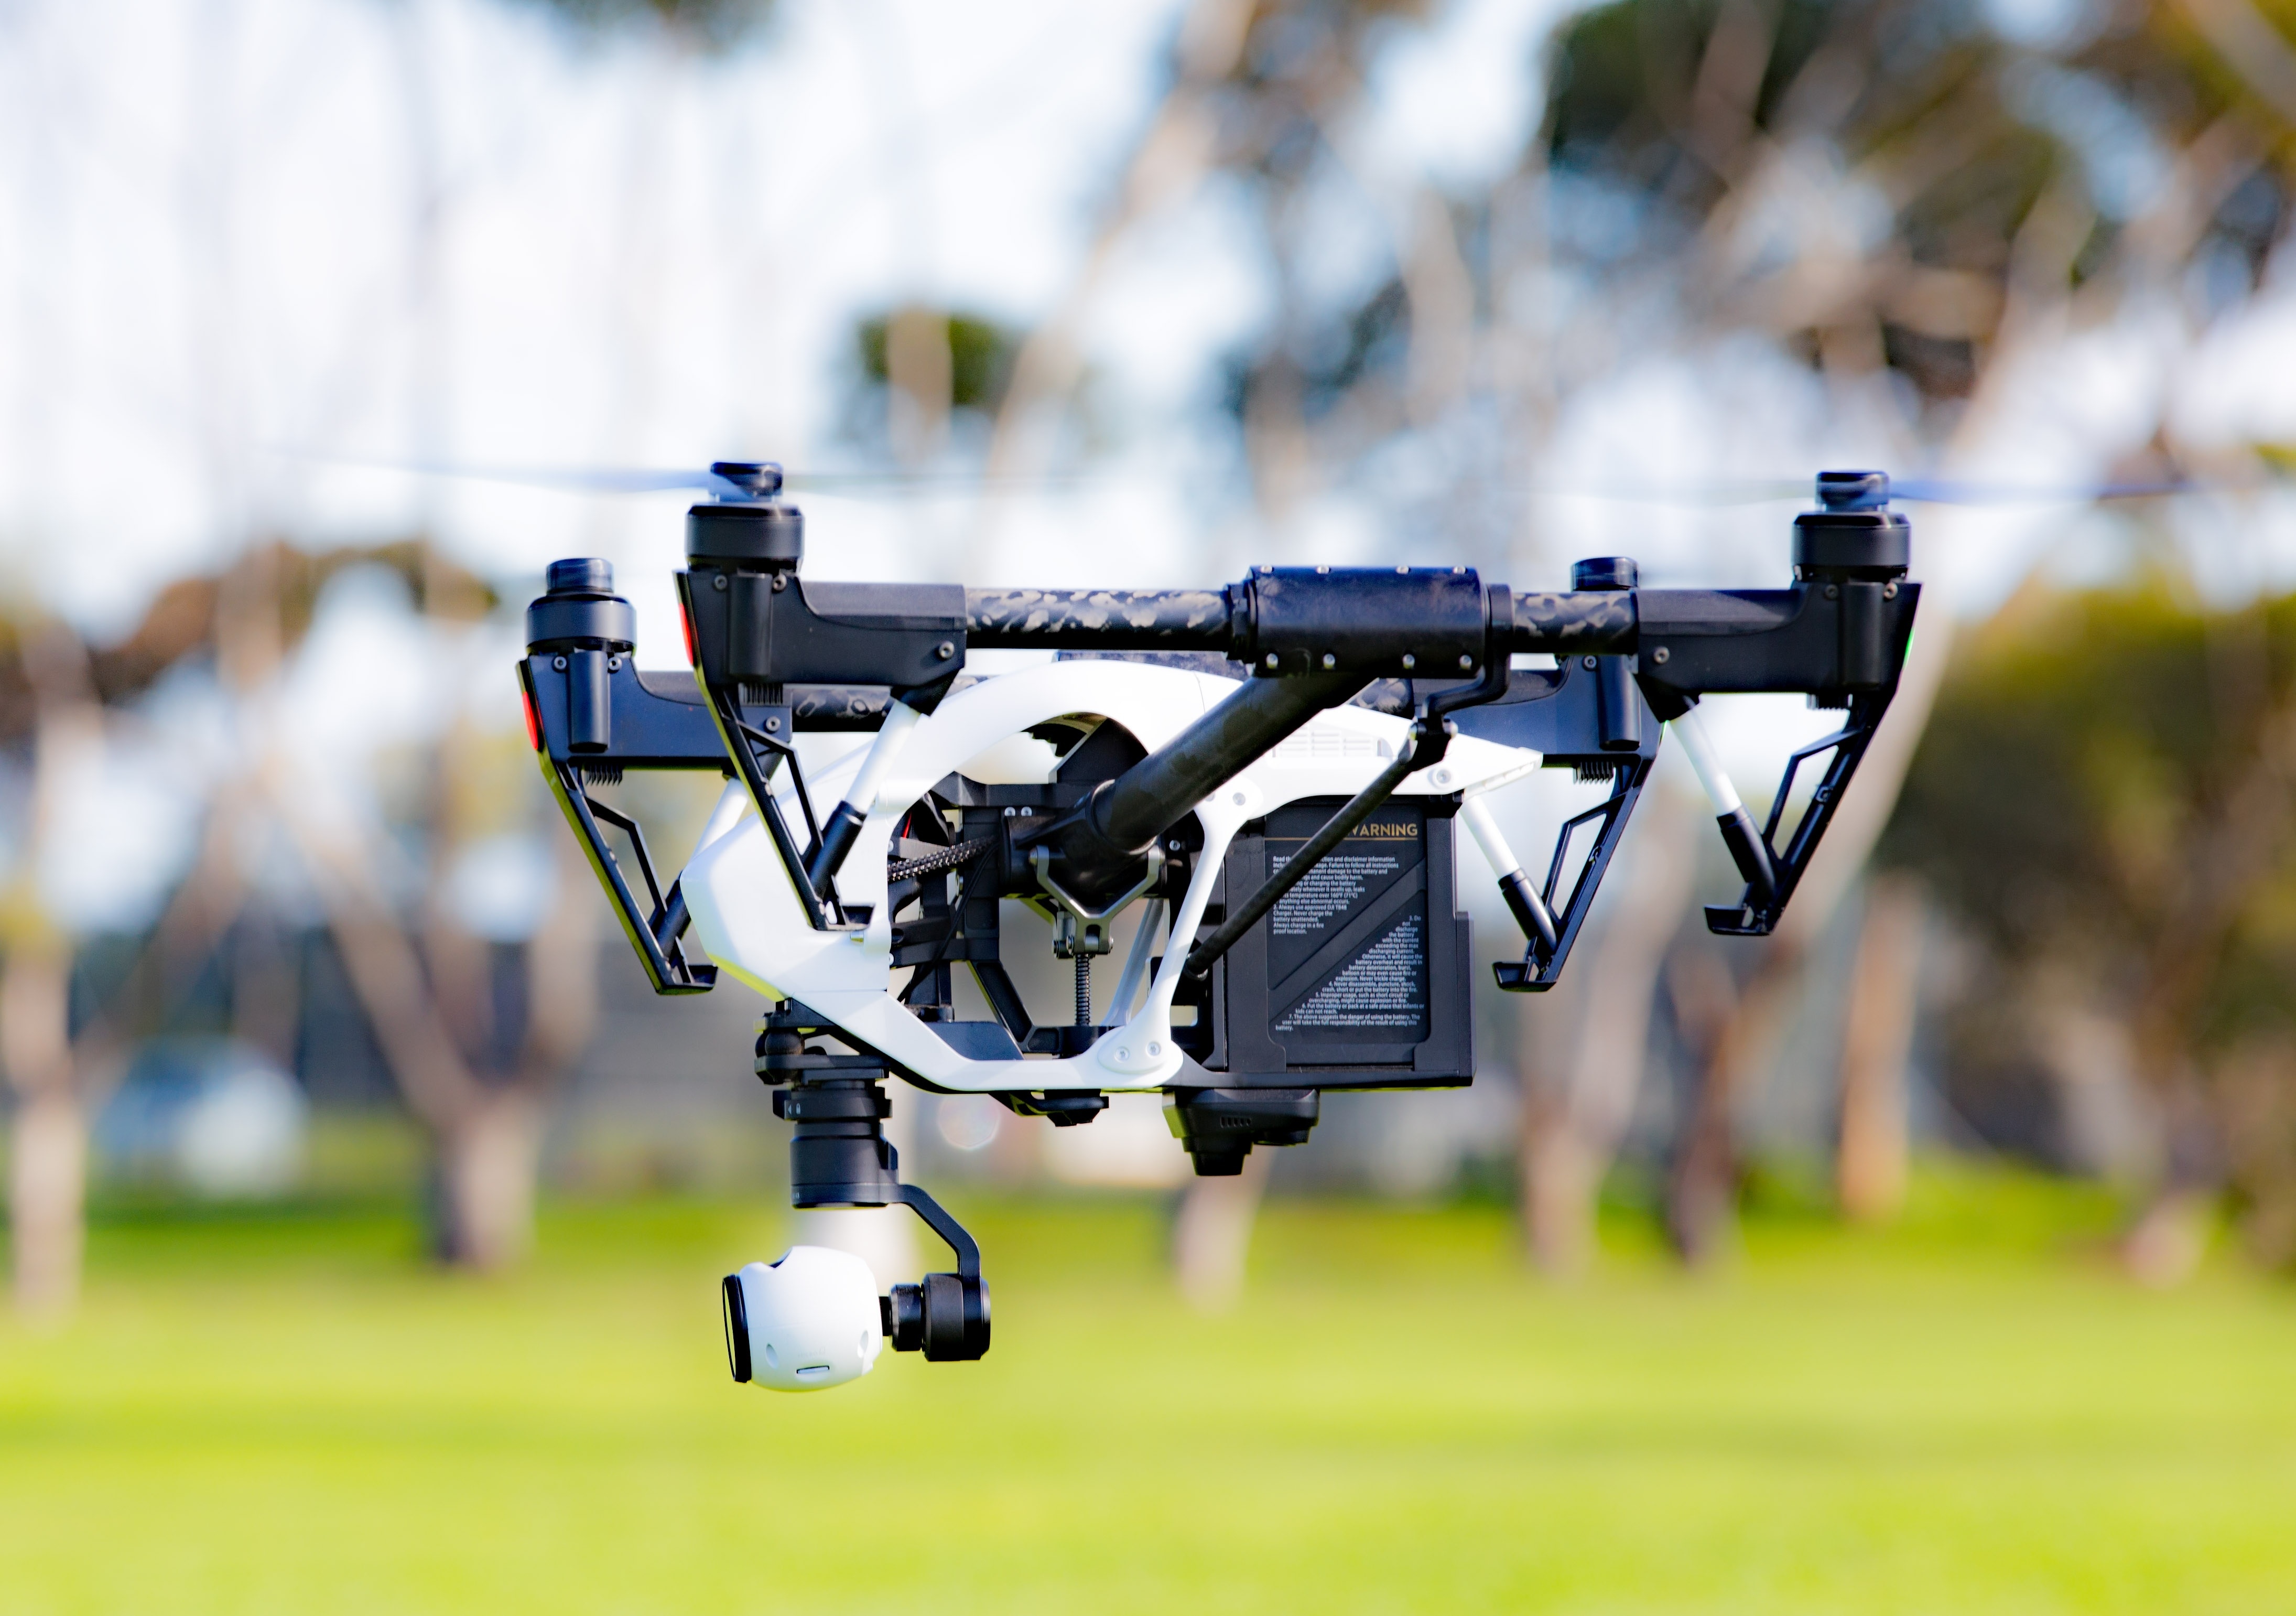 black and white rc quadcopter during daytime